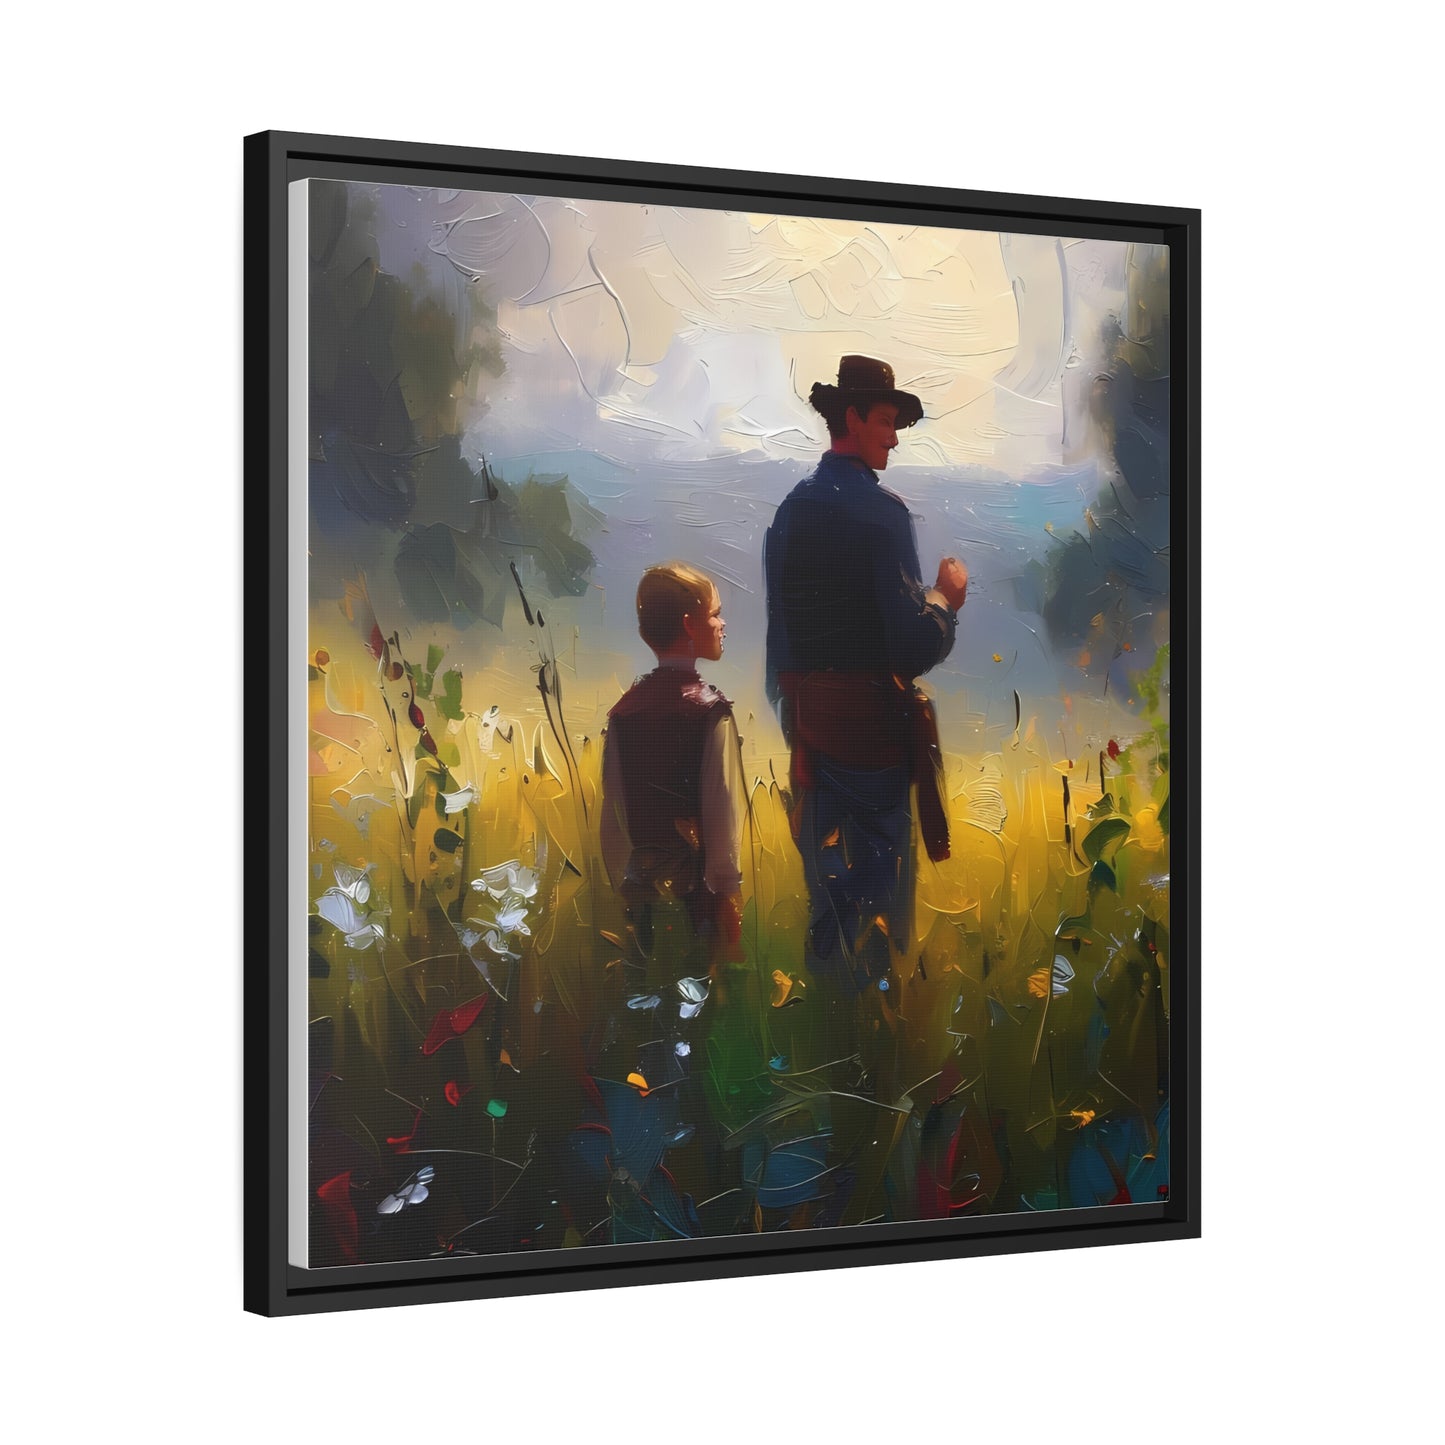 Awesome Matte Wall Art Canvas Decor Black Frame - Fathers Day Gift Item